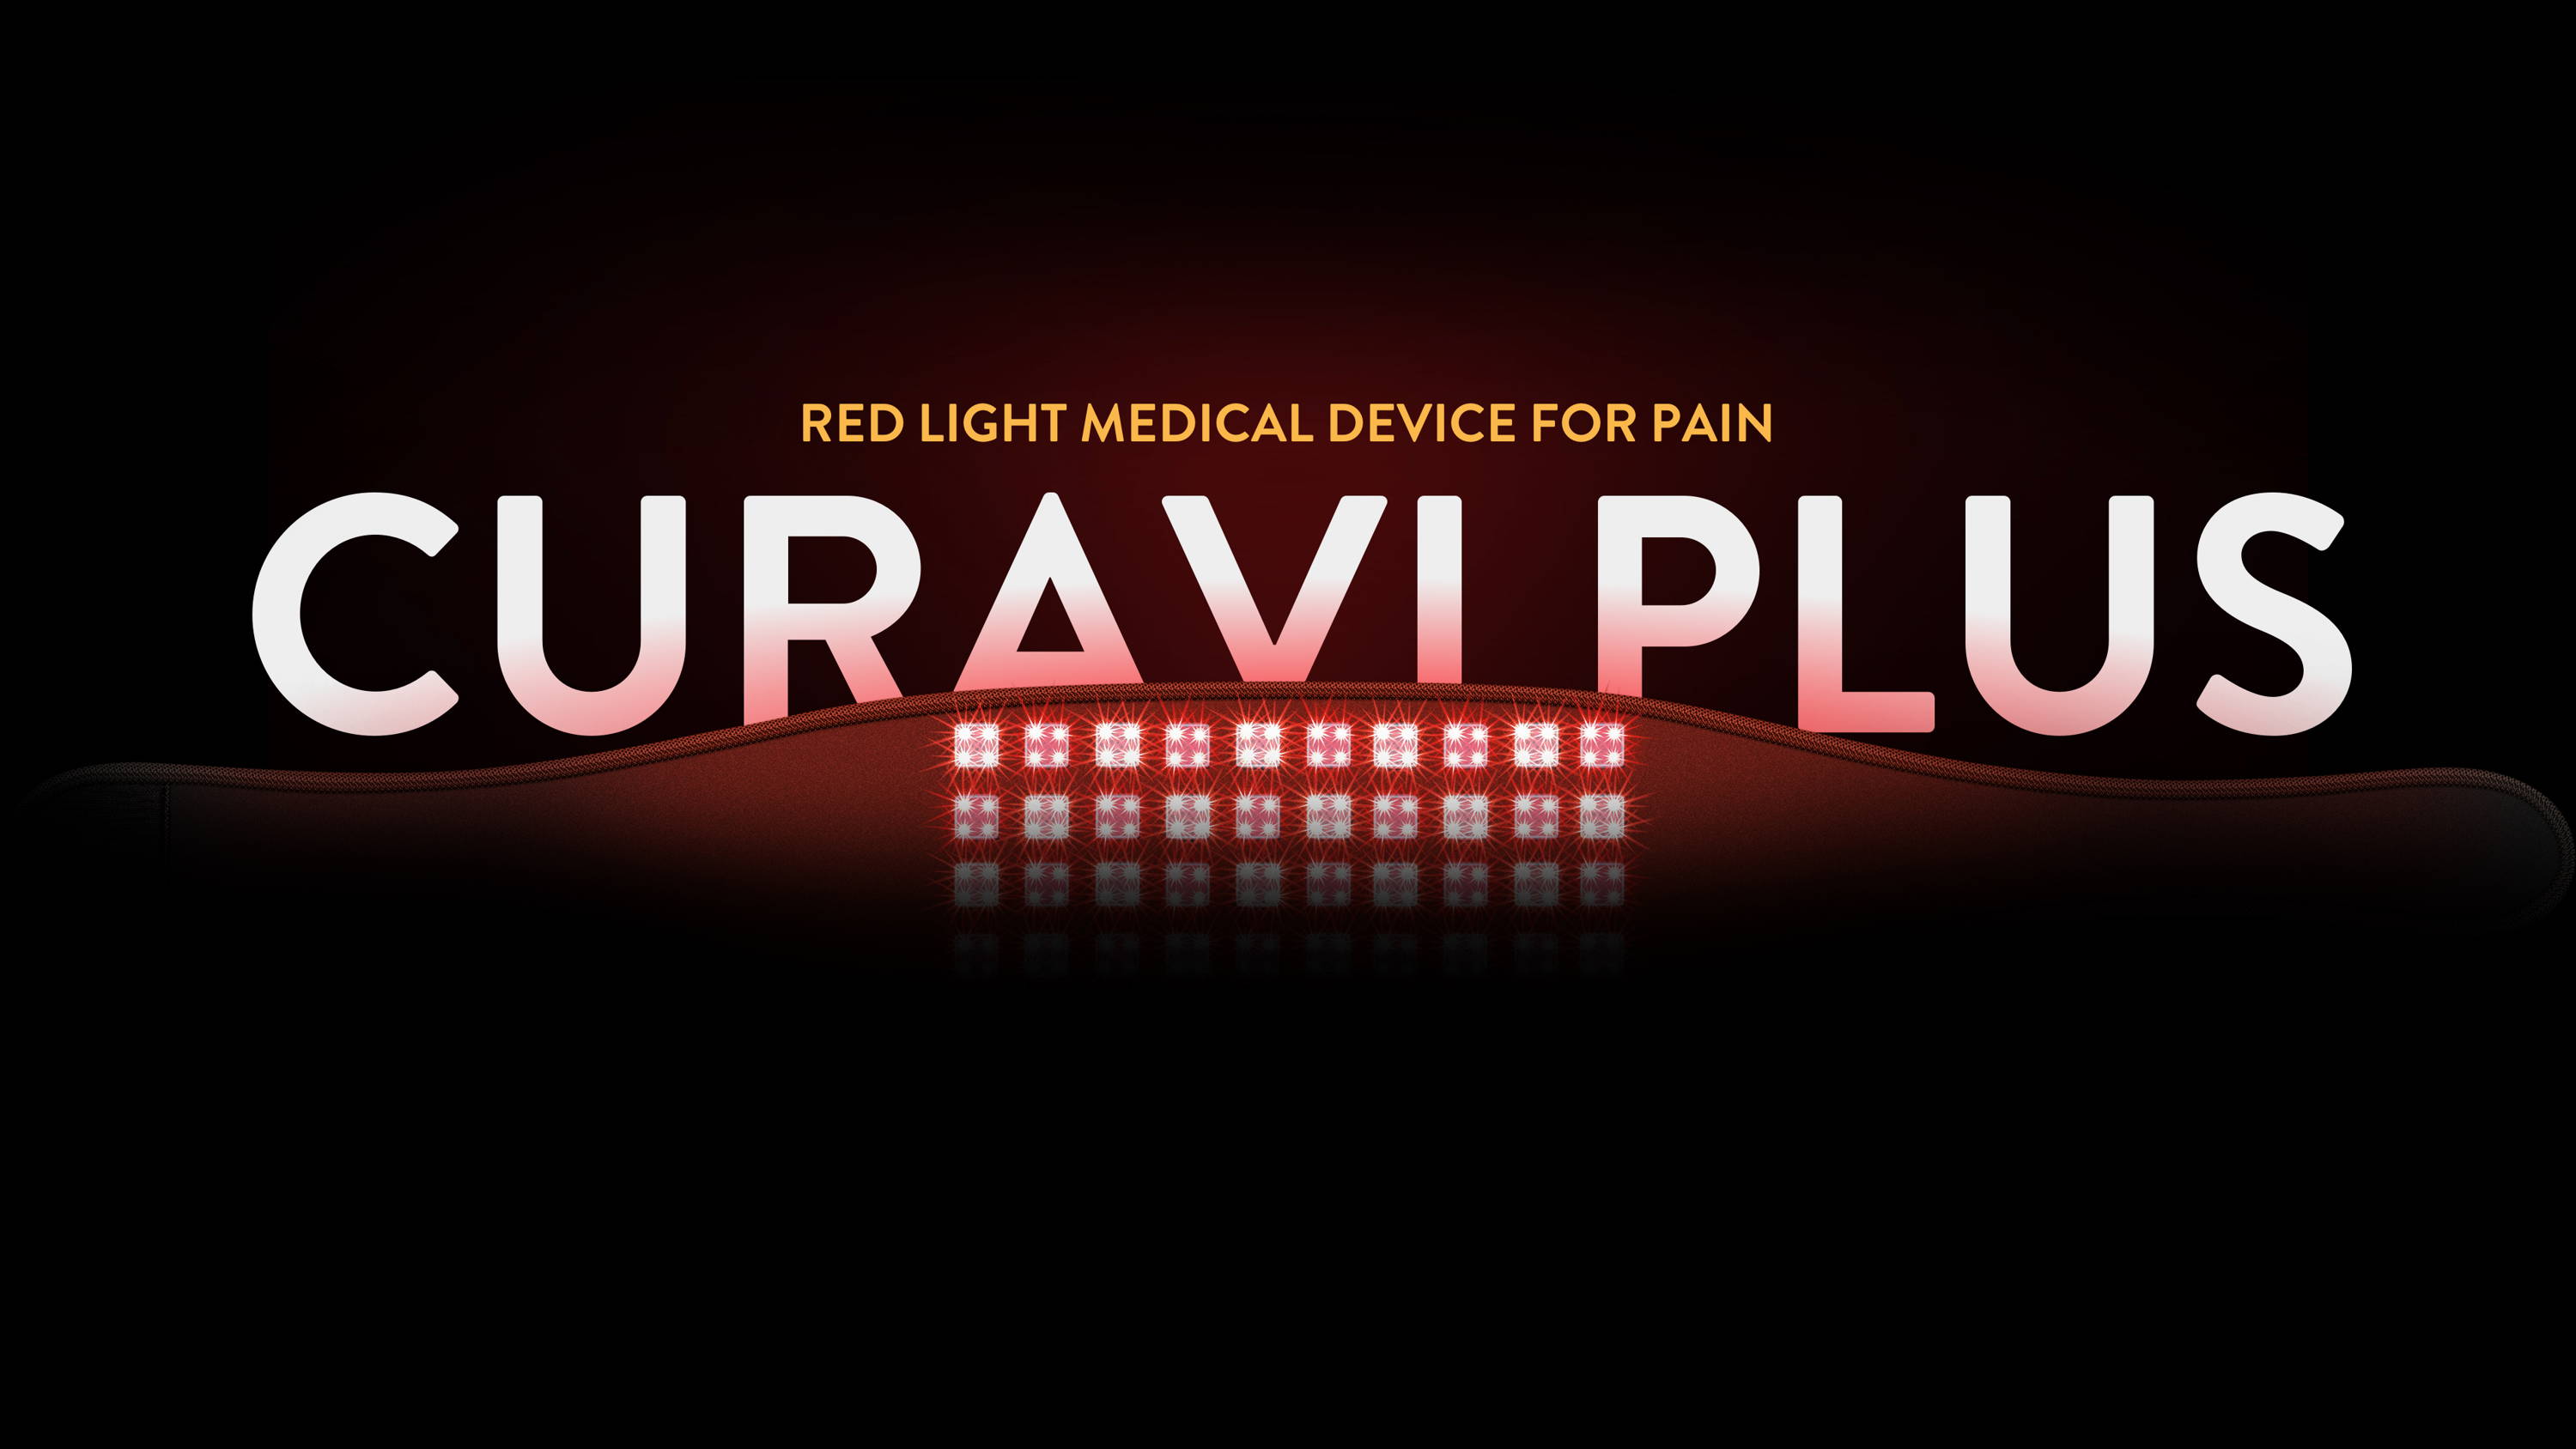 Red Light Medical Device for Pain. CuraviPlus